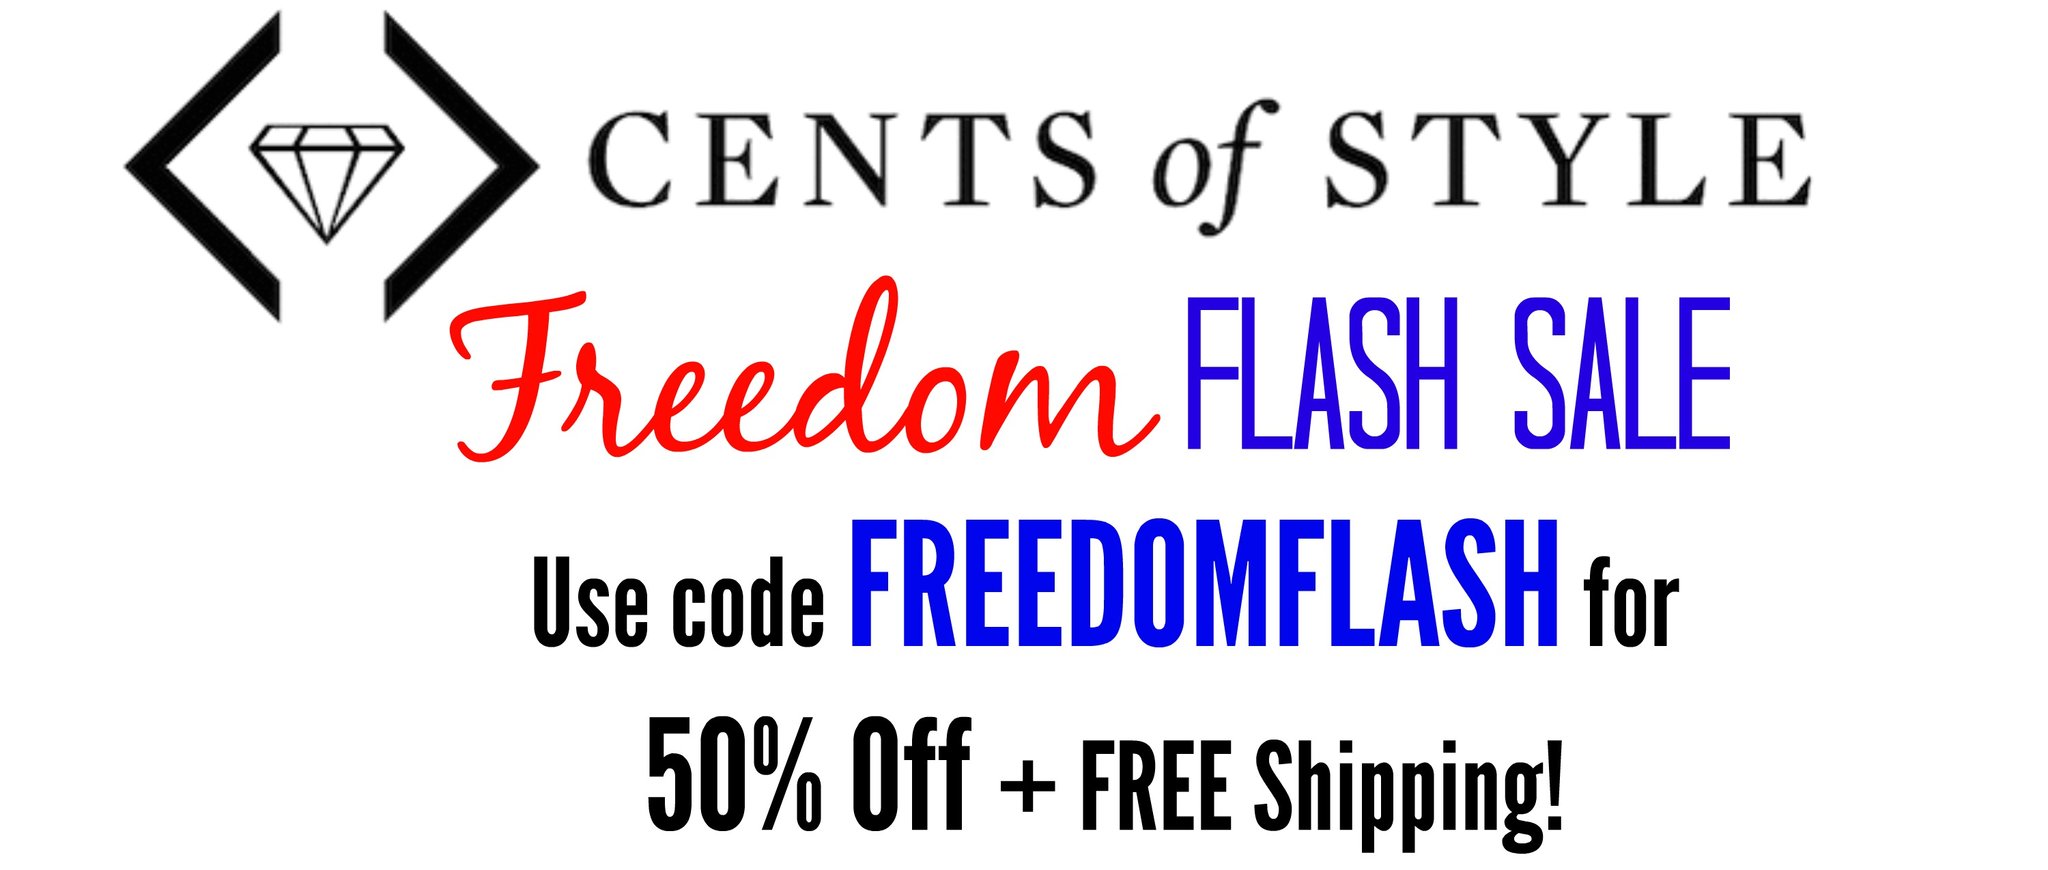 Cents of Style Freedom Flash Sale Extension!